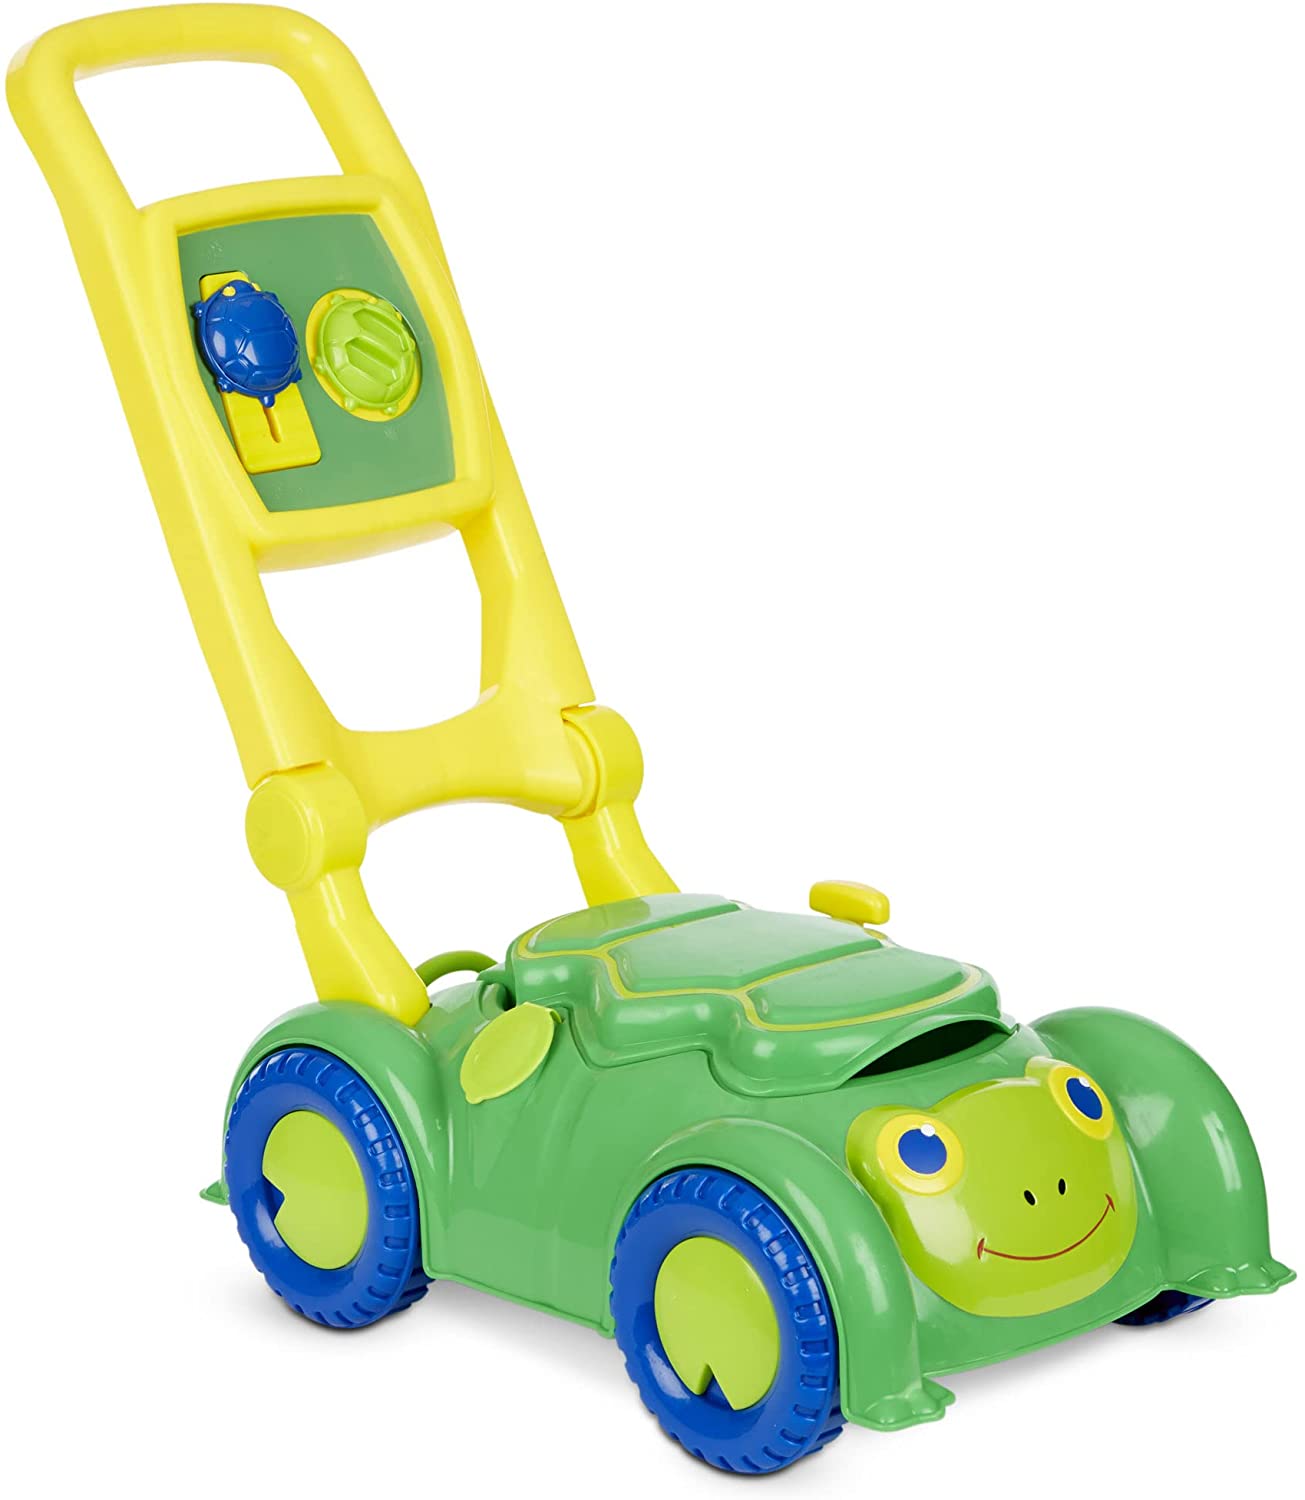 Melissa & Doug Kids' Sunny Patch Snappy Turtle Lawn Mower $10 + Free Shipping w/ Amazon Prime or Orders $25+